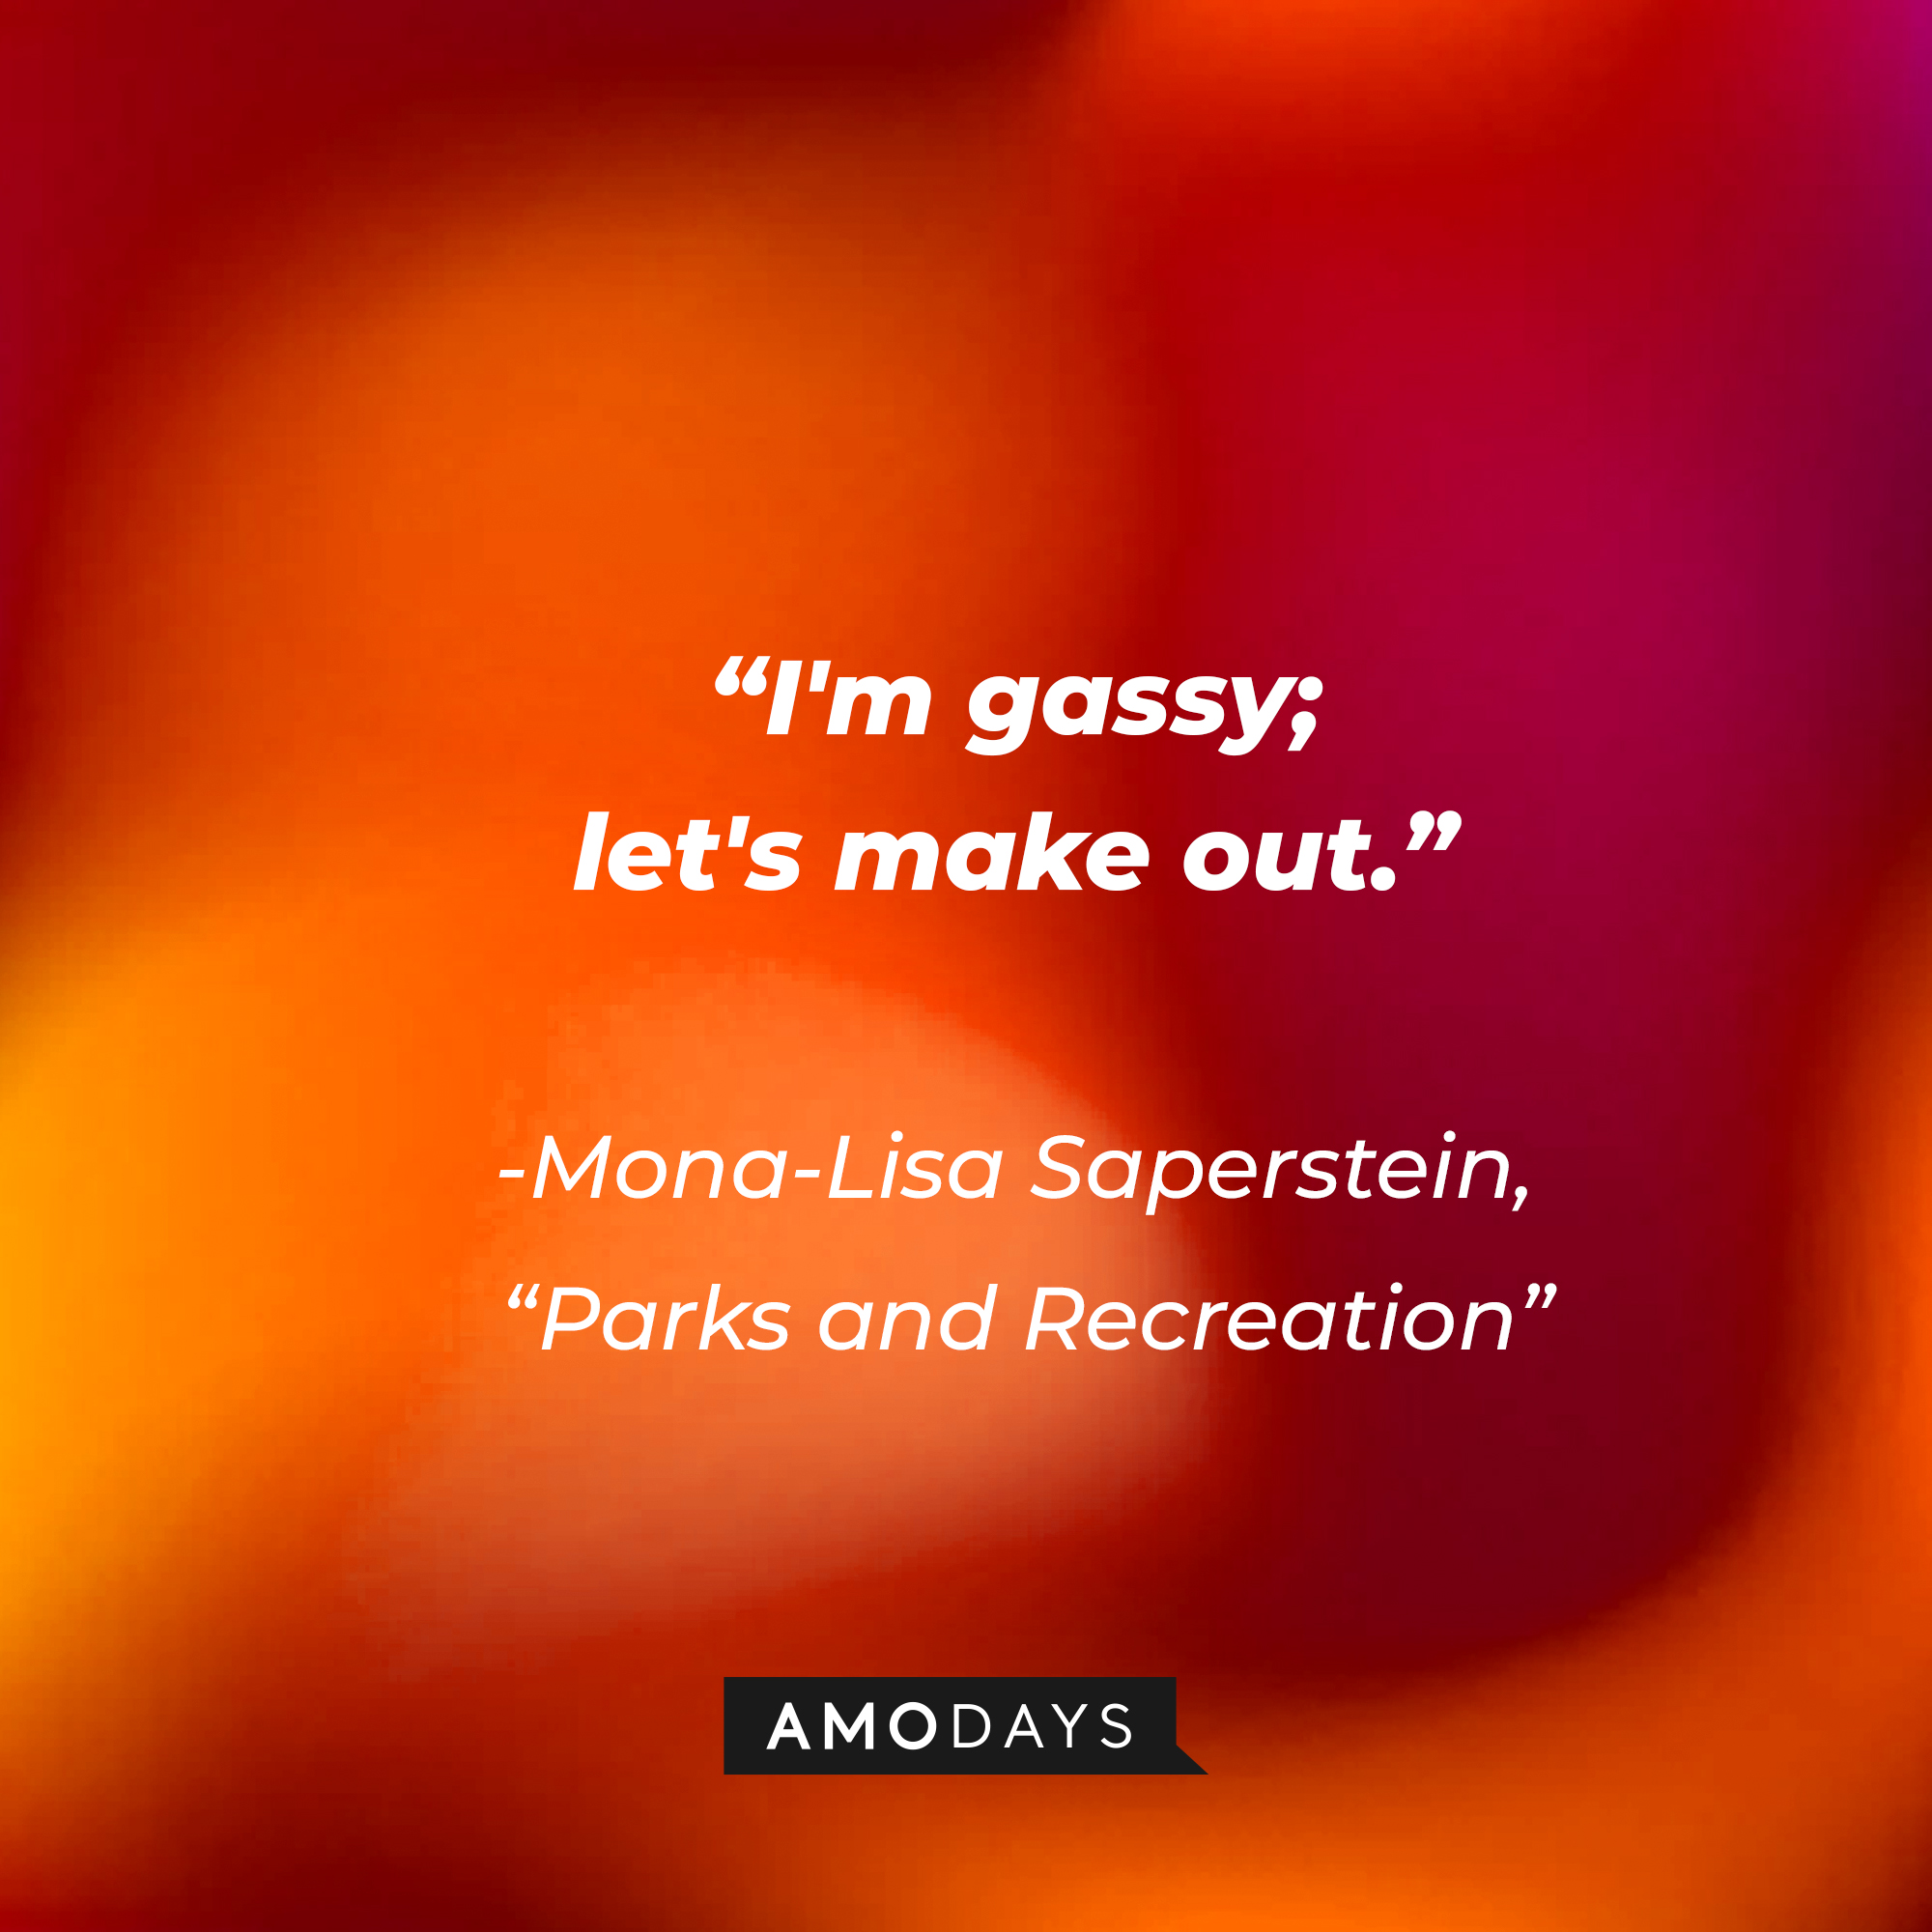 Mona-Lisa Saperstein's quote on "Parks and Recreation:" “I'm gassy; let's make out." | Source: AmoDays